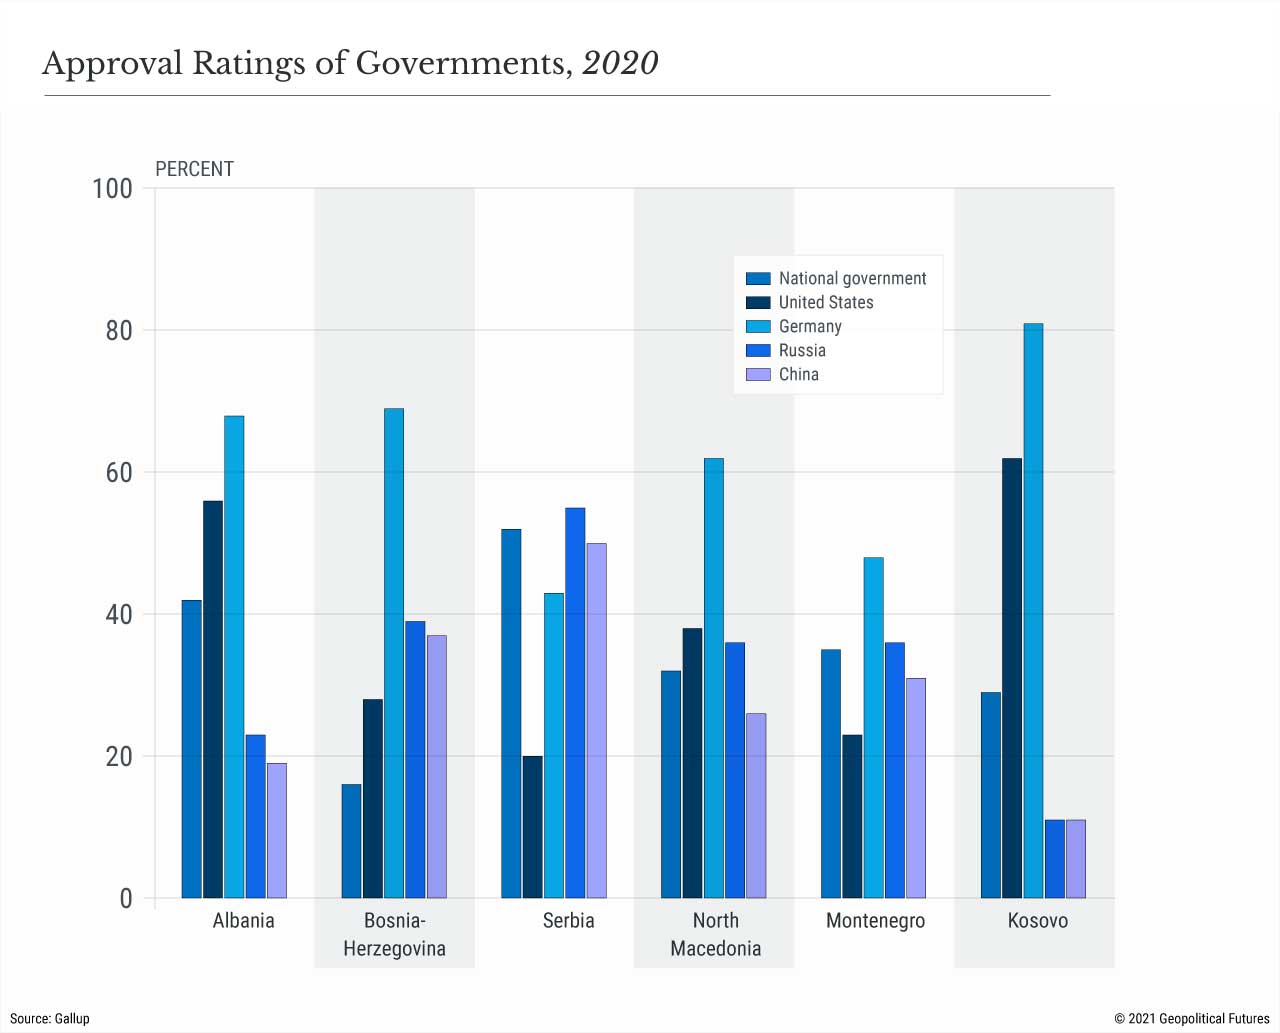 Approval Ratings of Governments - 2020